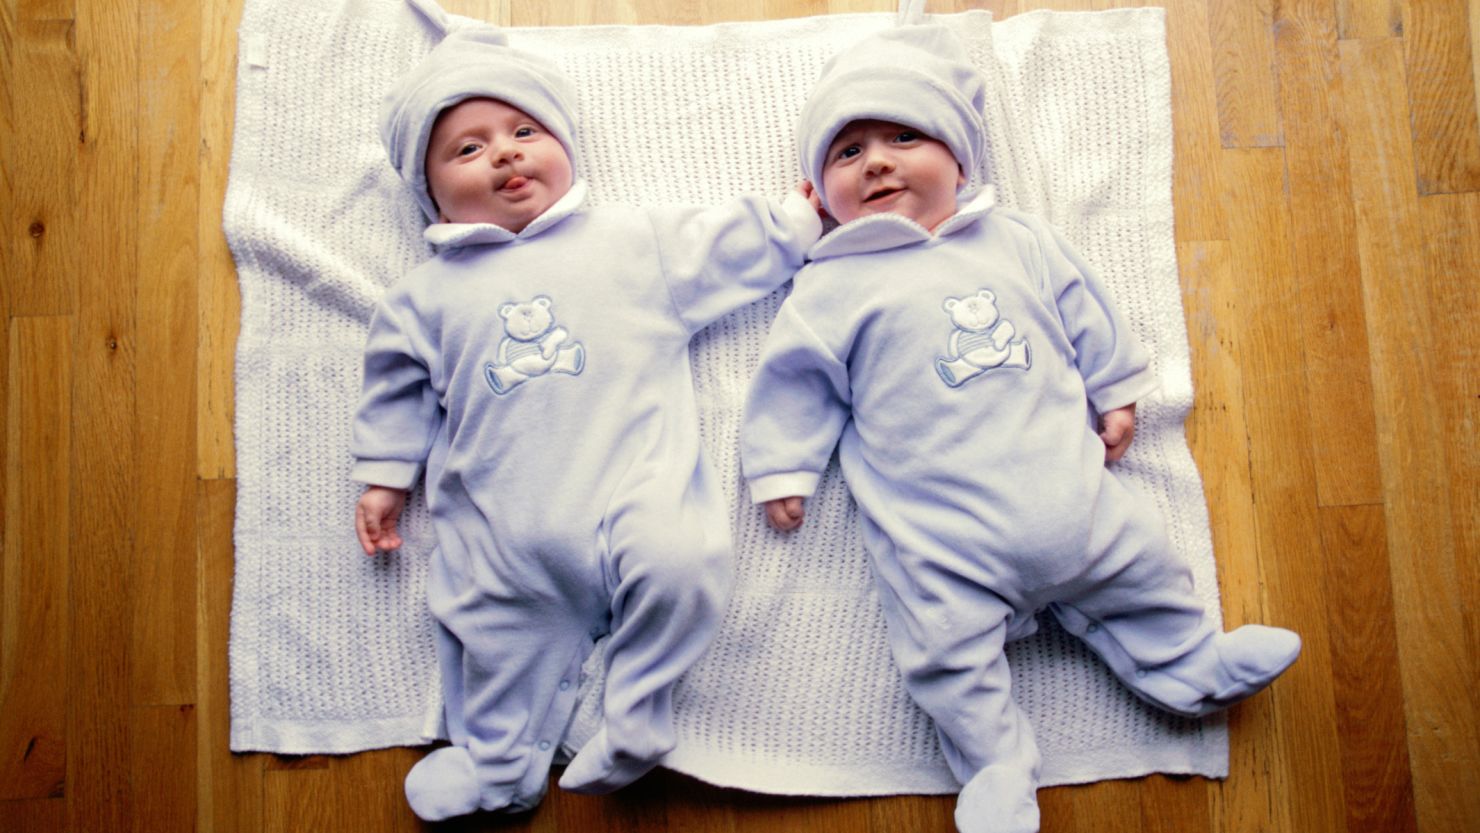 The chance of having twins grows when a woman has more than one embryo implanted during in vitro fertilization.